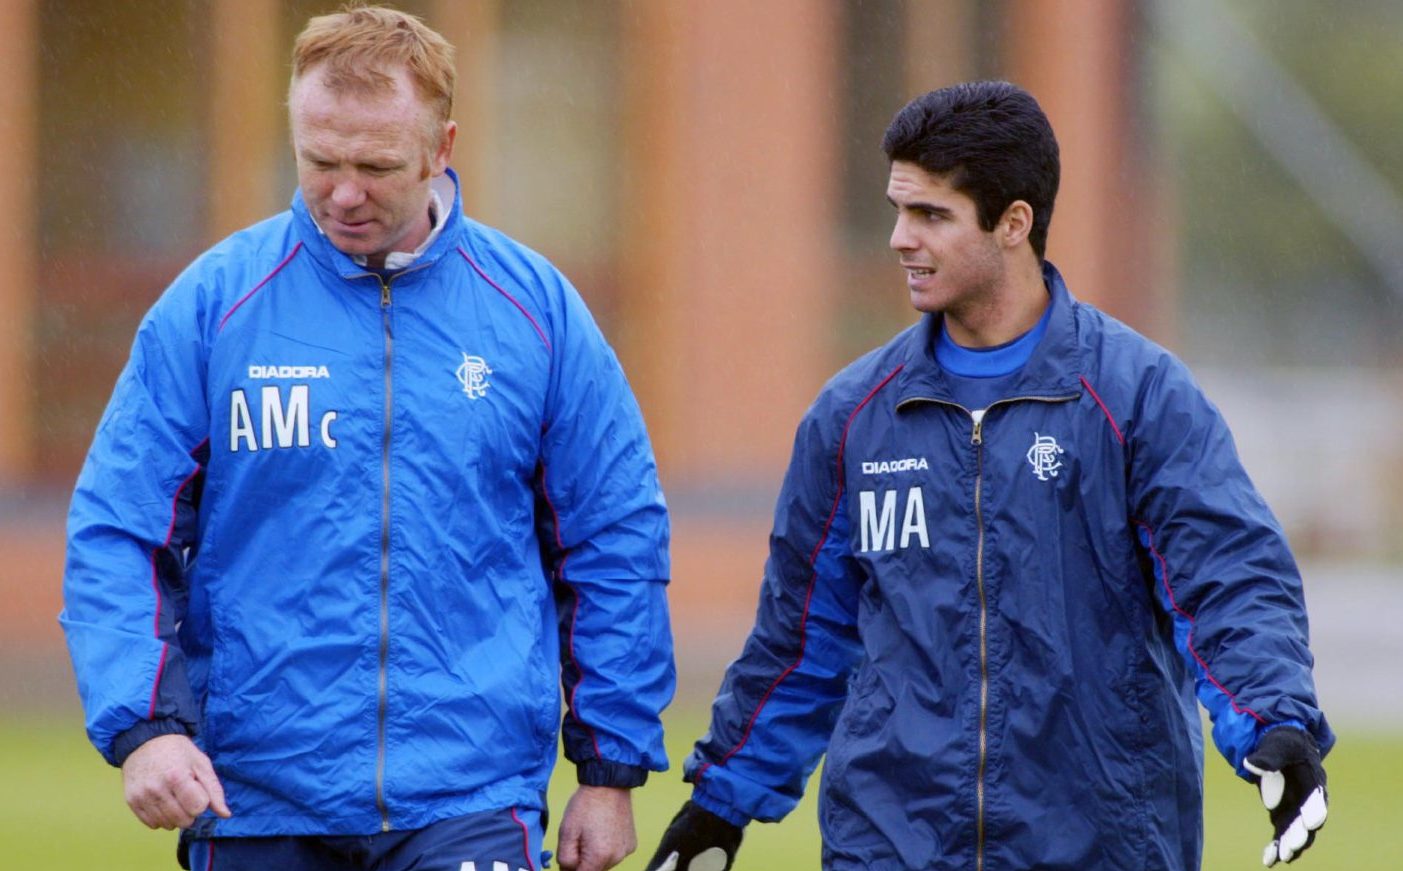 Alex McLeish, then the Rangers manager, is quizzed on tactics by Mikel Arteta at Murray Park in 2002